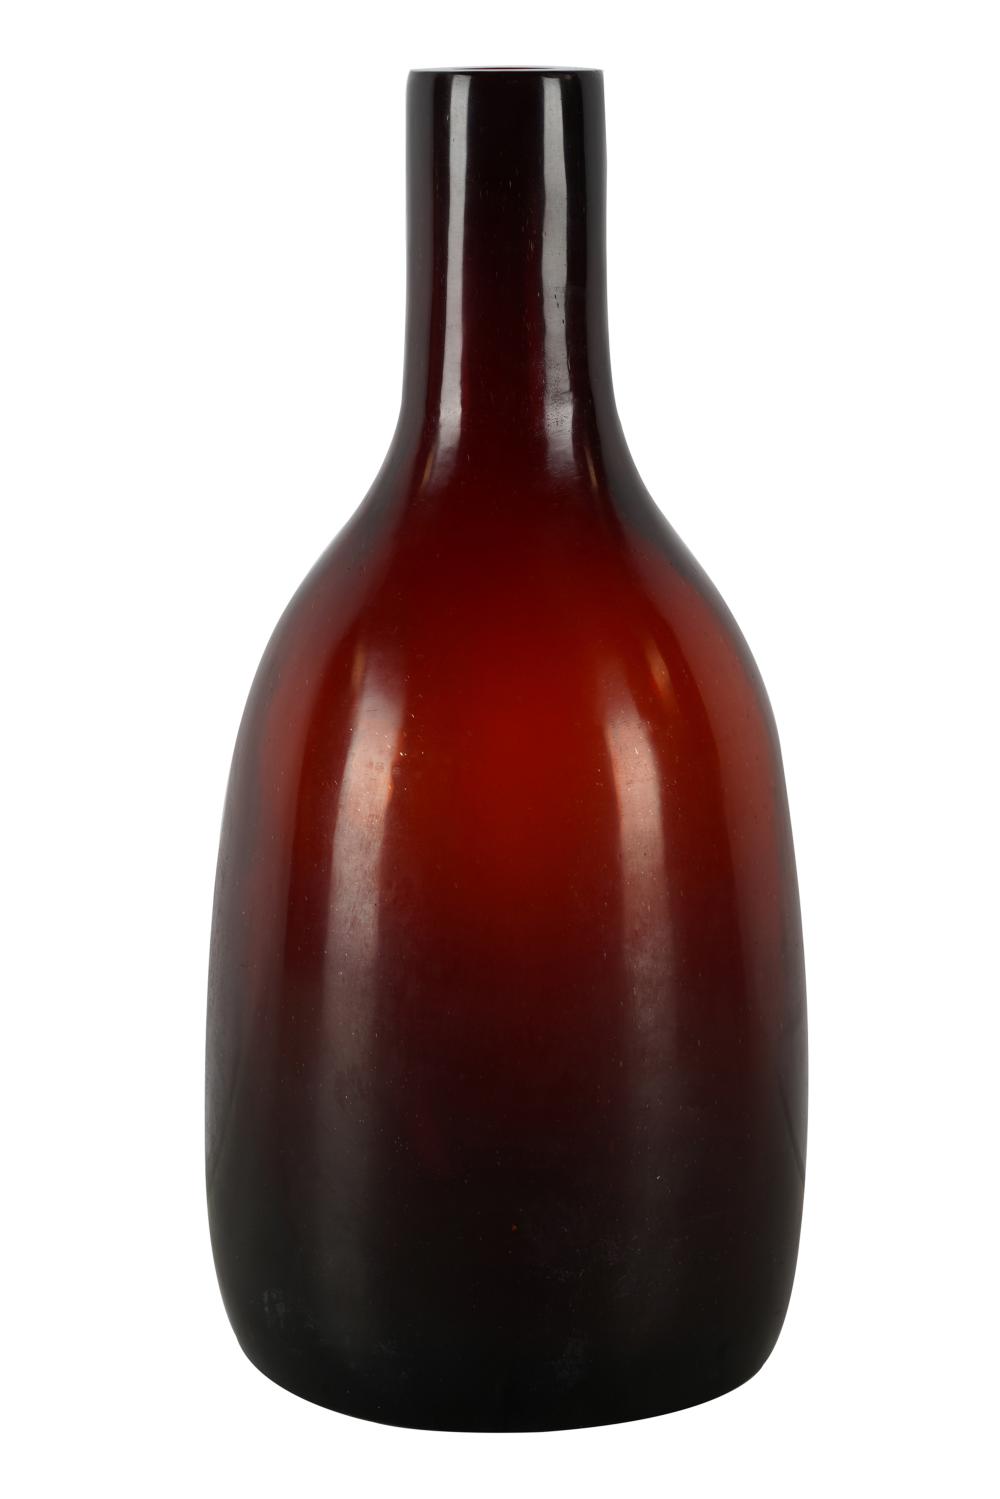 RED ART GLASS BOTTLE VASEwith illegible